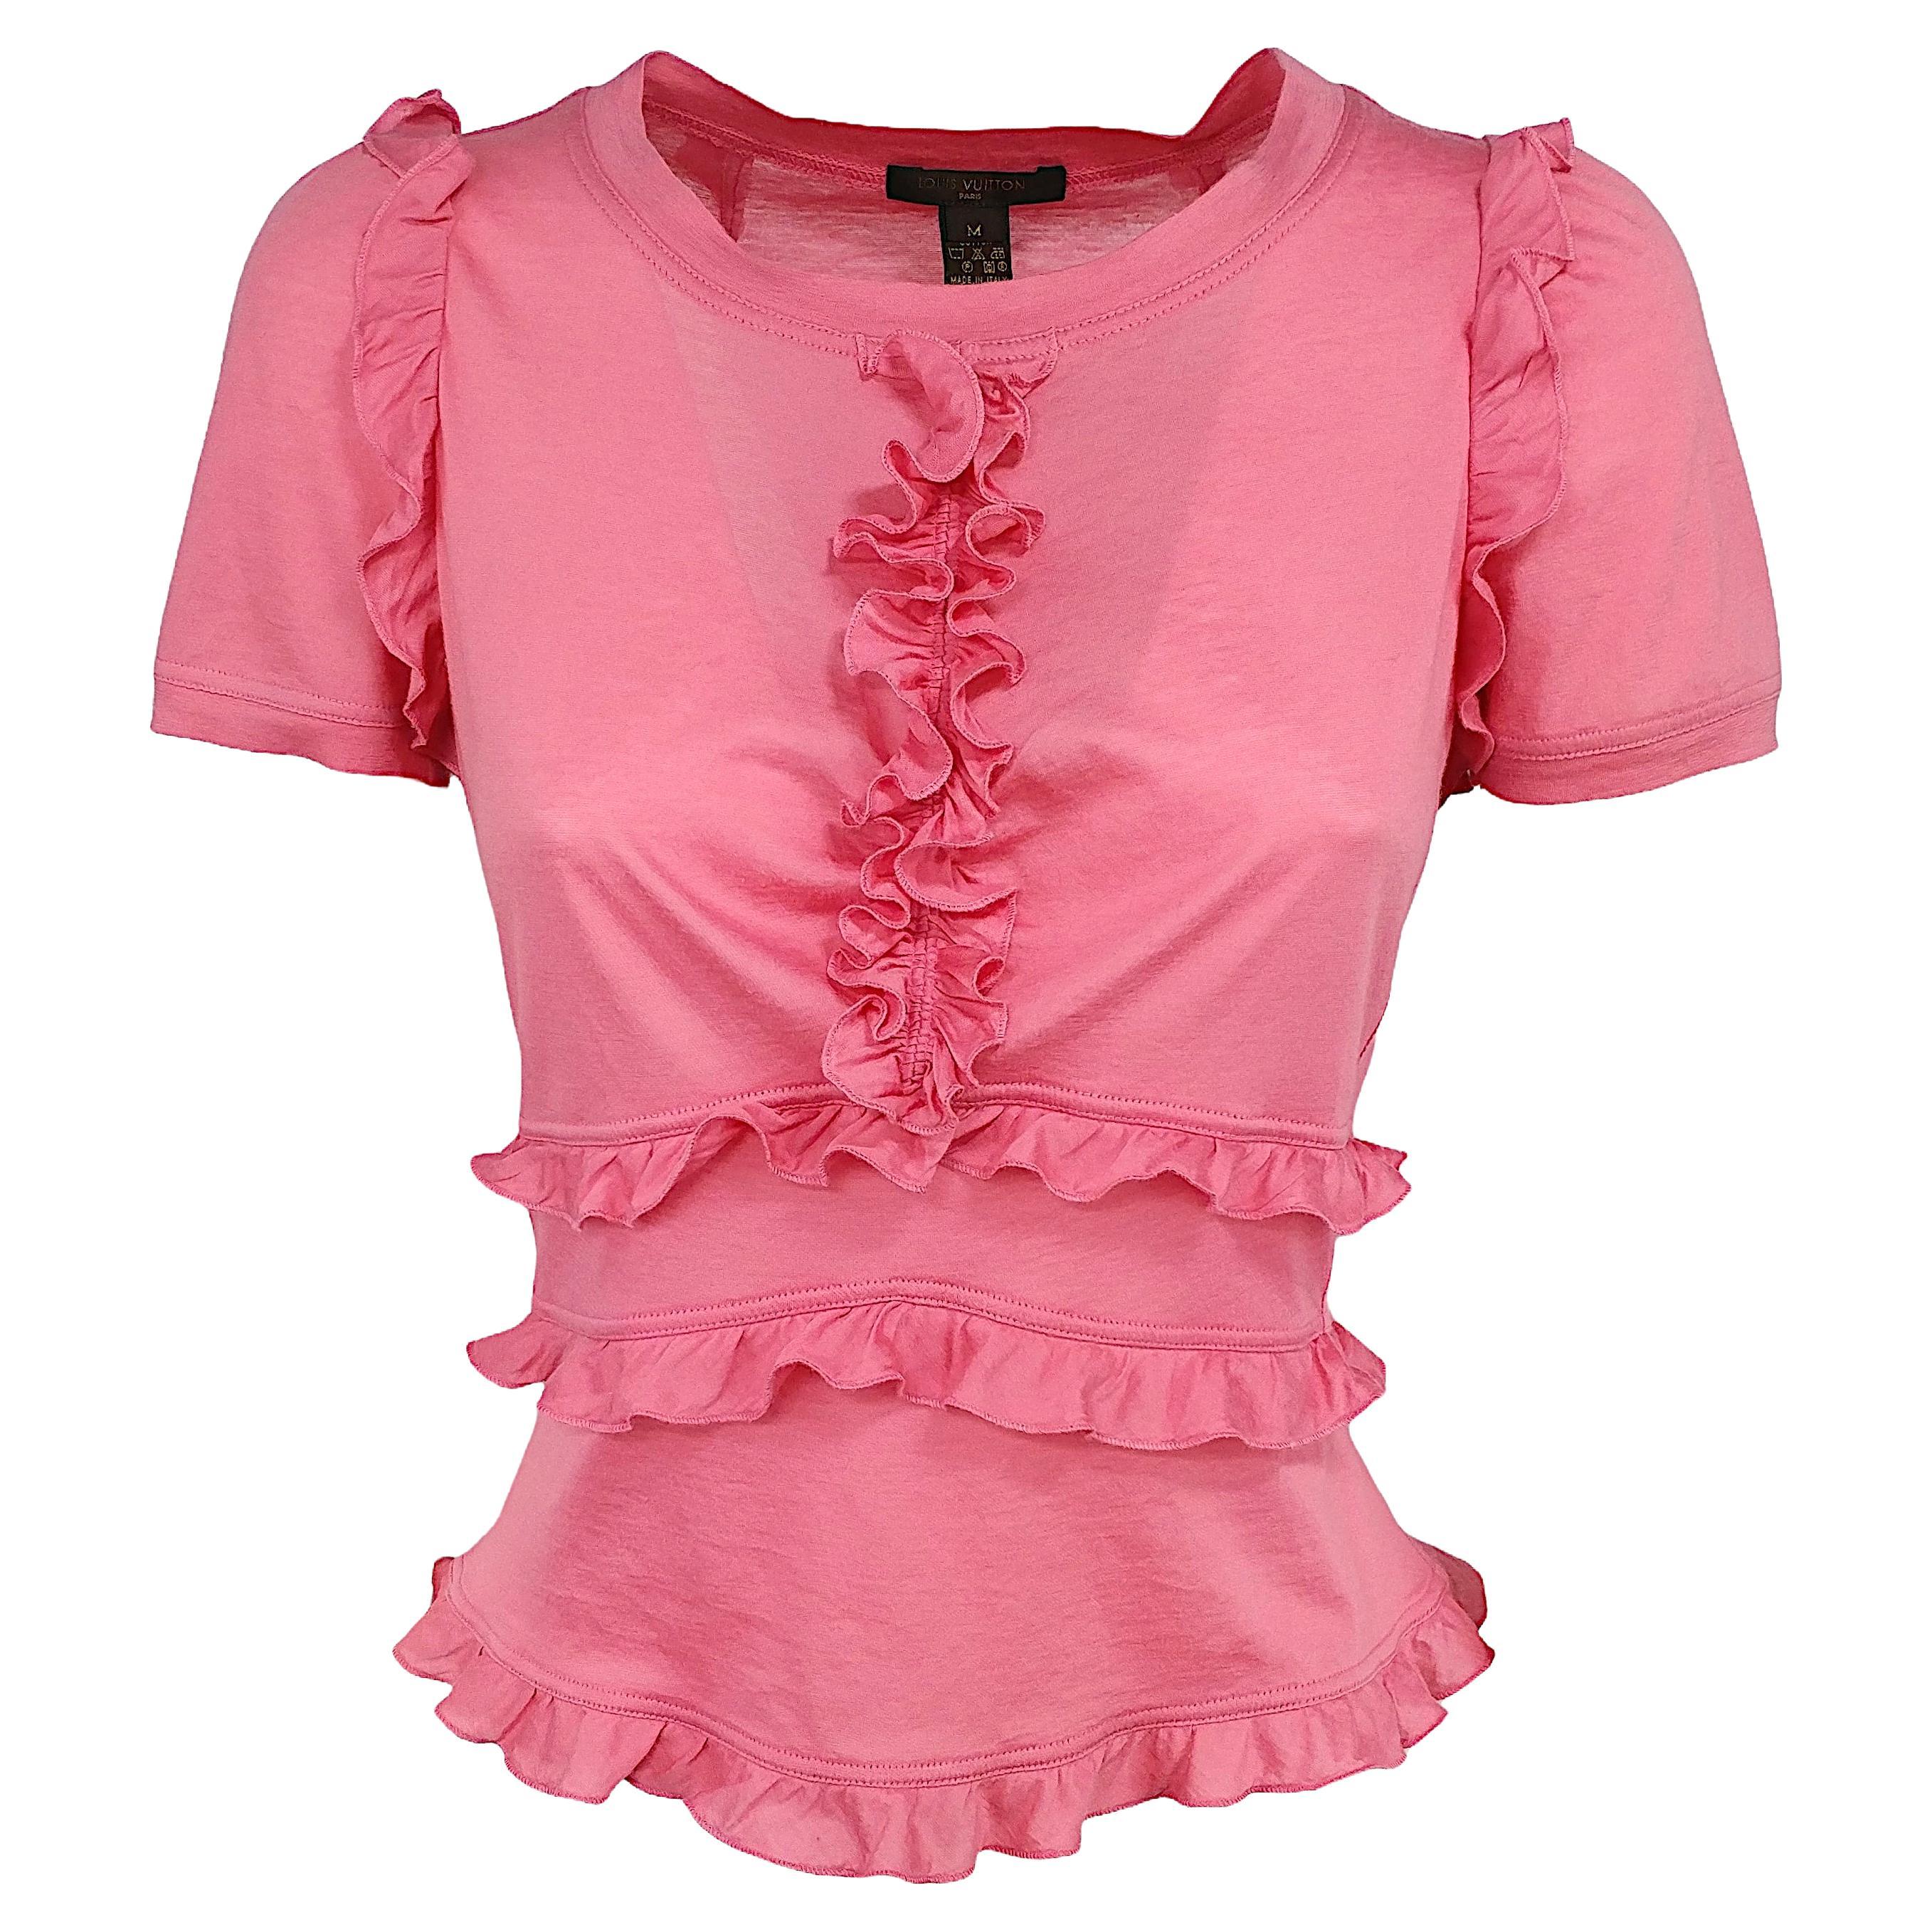 LOUIS VUITTON - Pink Cotton Top with Ruffles and Short Sleeves  Size M